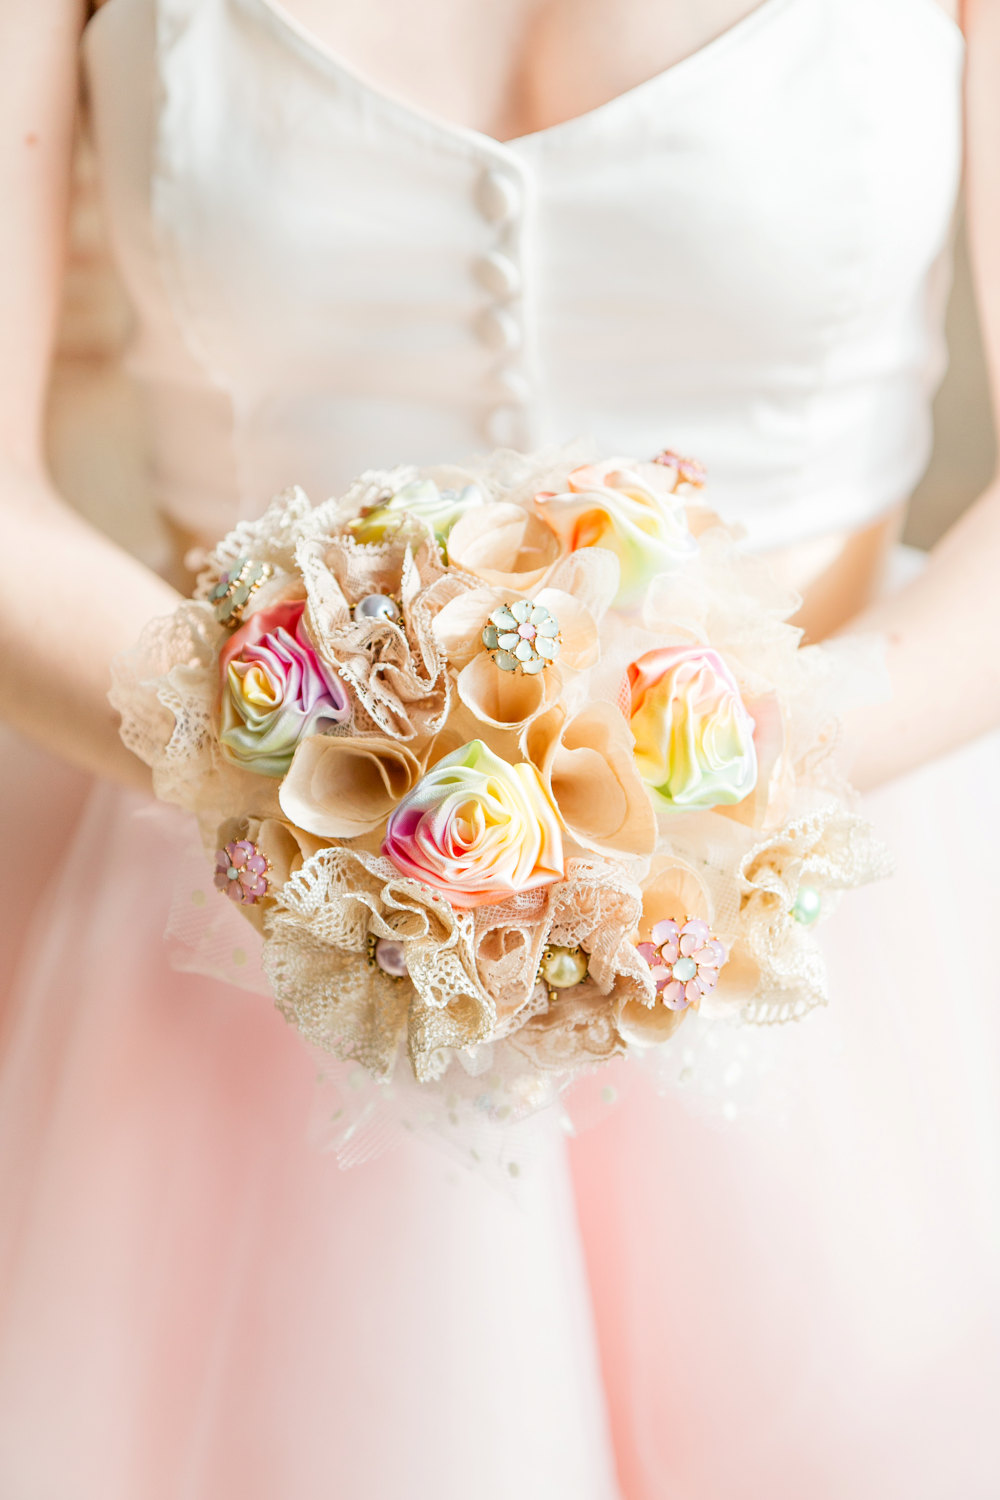 wedding bouquet ideas without flowers